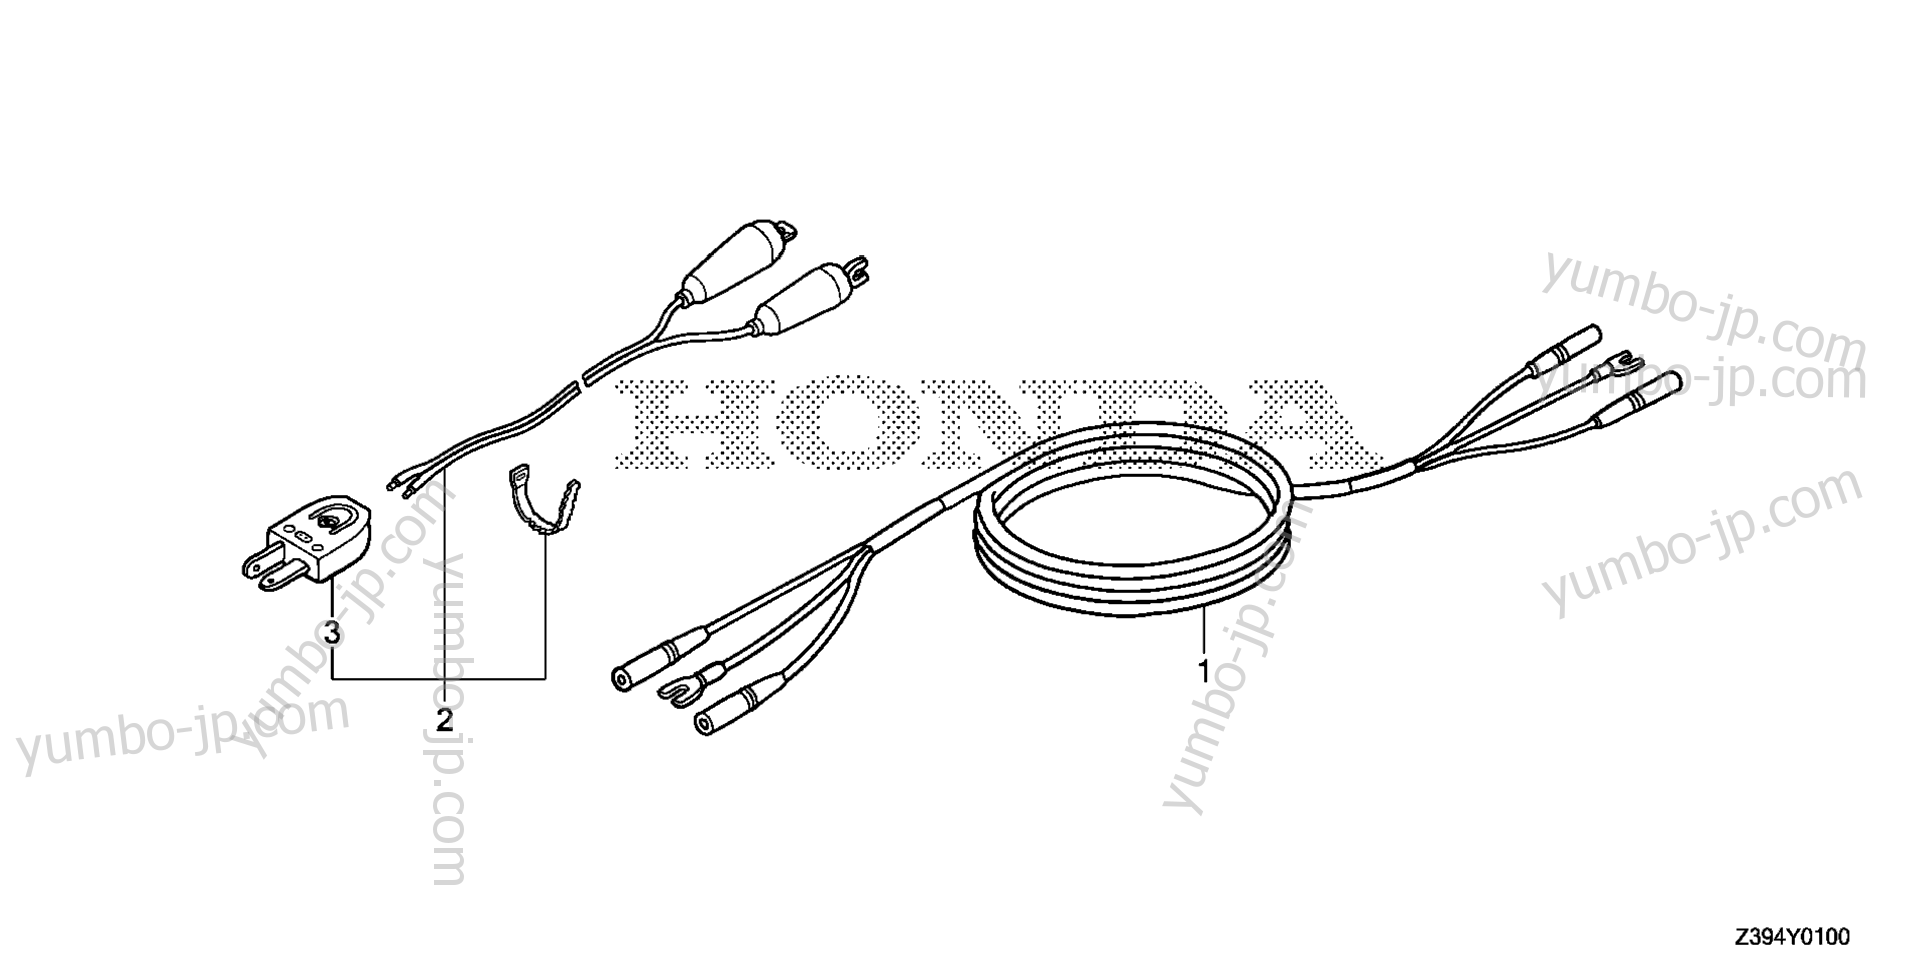 PARALLEL CABLE KIT / CHARGE CORD for Generators HONDA EU2000IT1 A3 